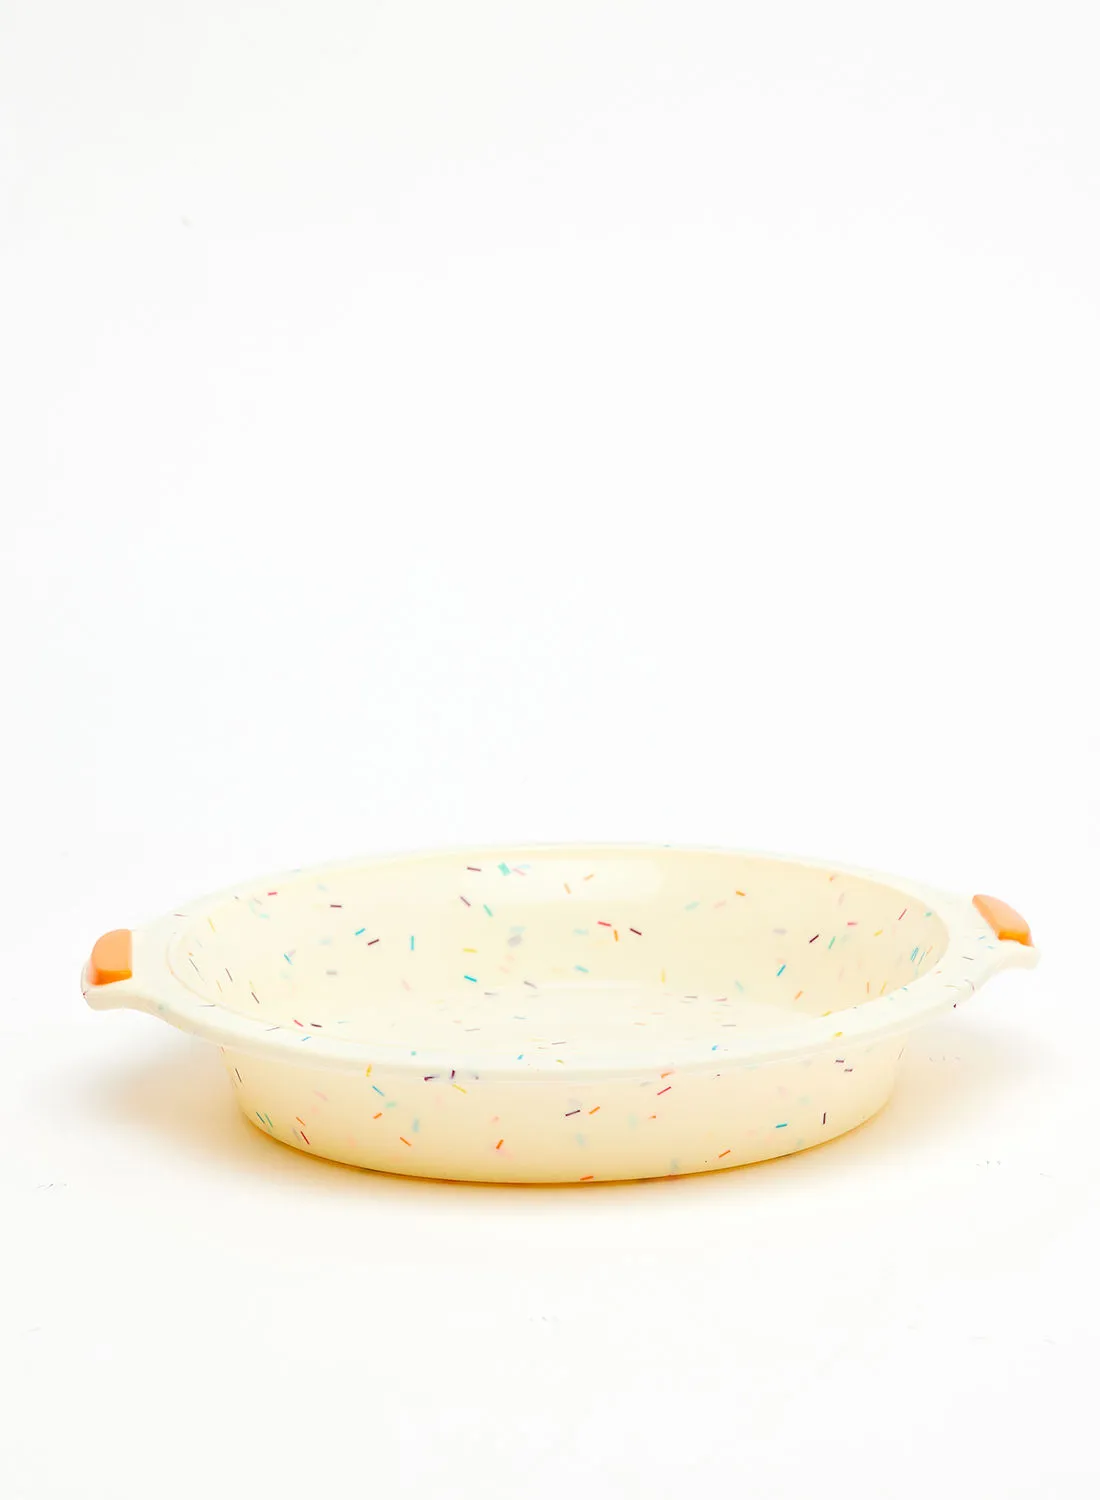 noon east Oven Pan - Made Of Silicone - Round 27 Cm - Baking Pan - Oven Trays - Cake Tray - Oven Pan - Cream/Sprinkles